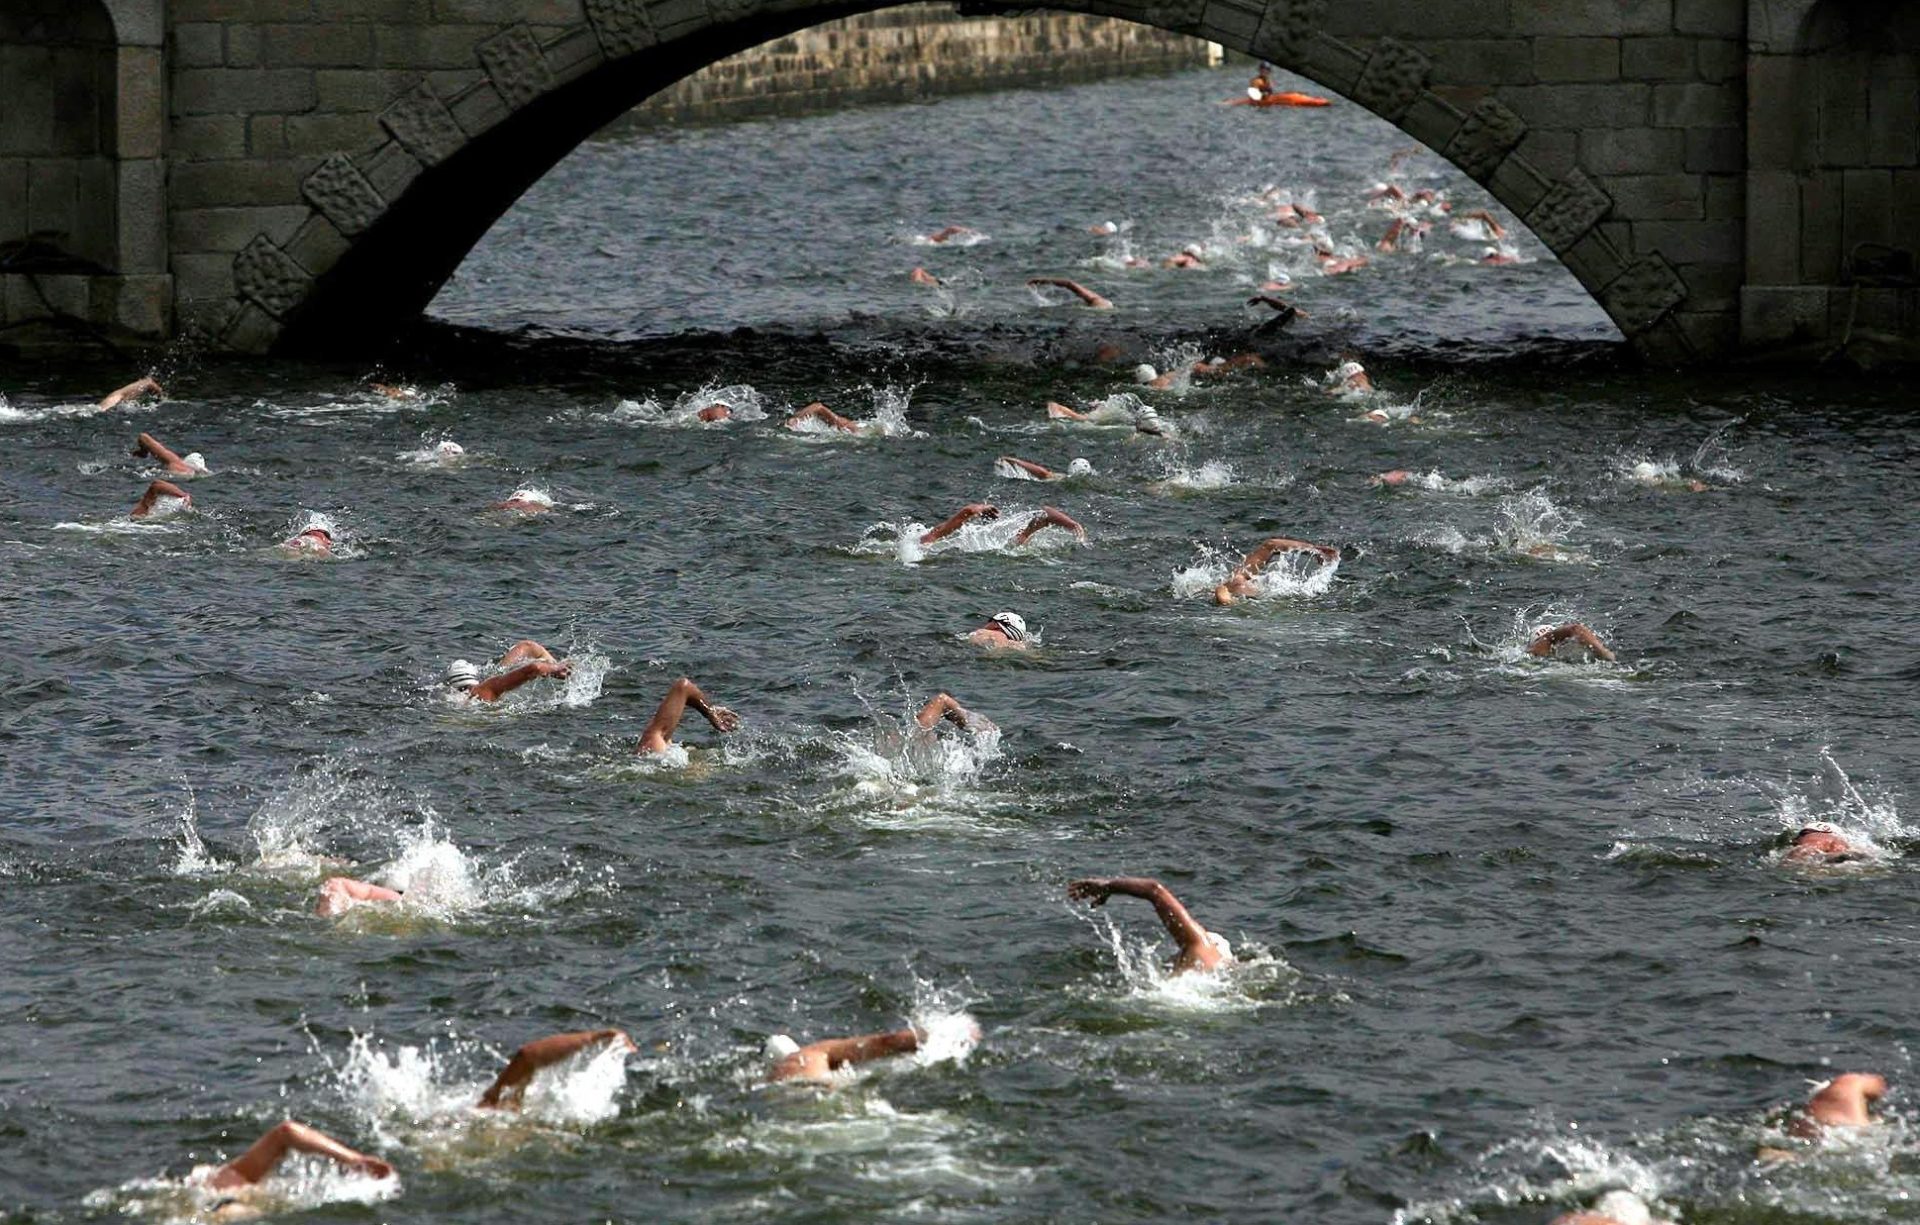 How a 'cultural shift' could see more people swimming in the River ...